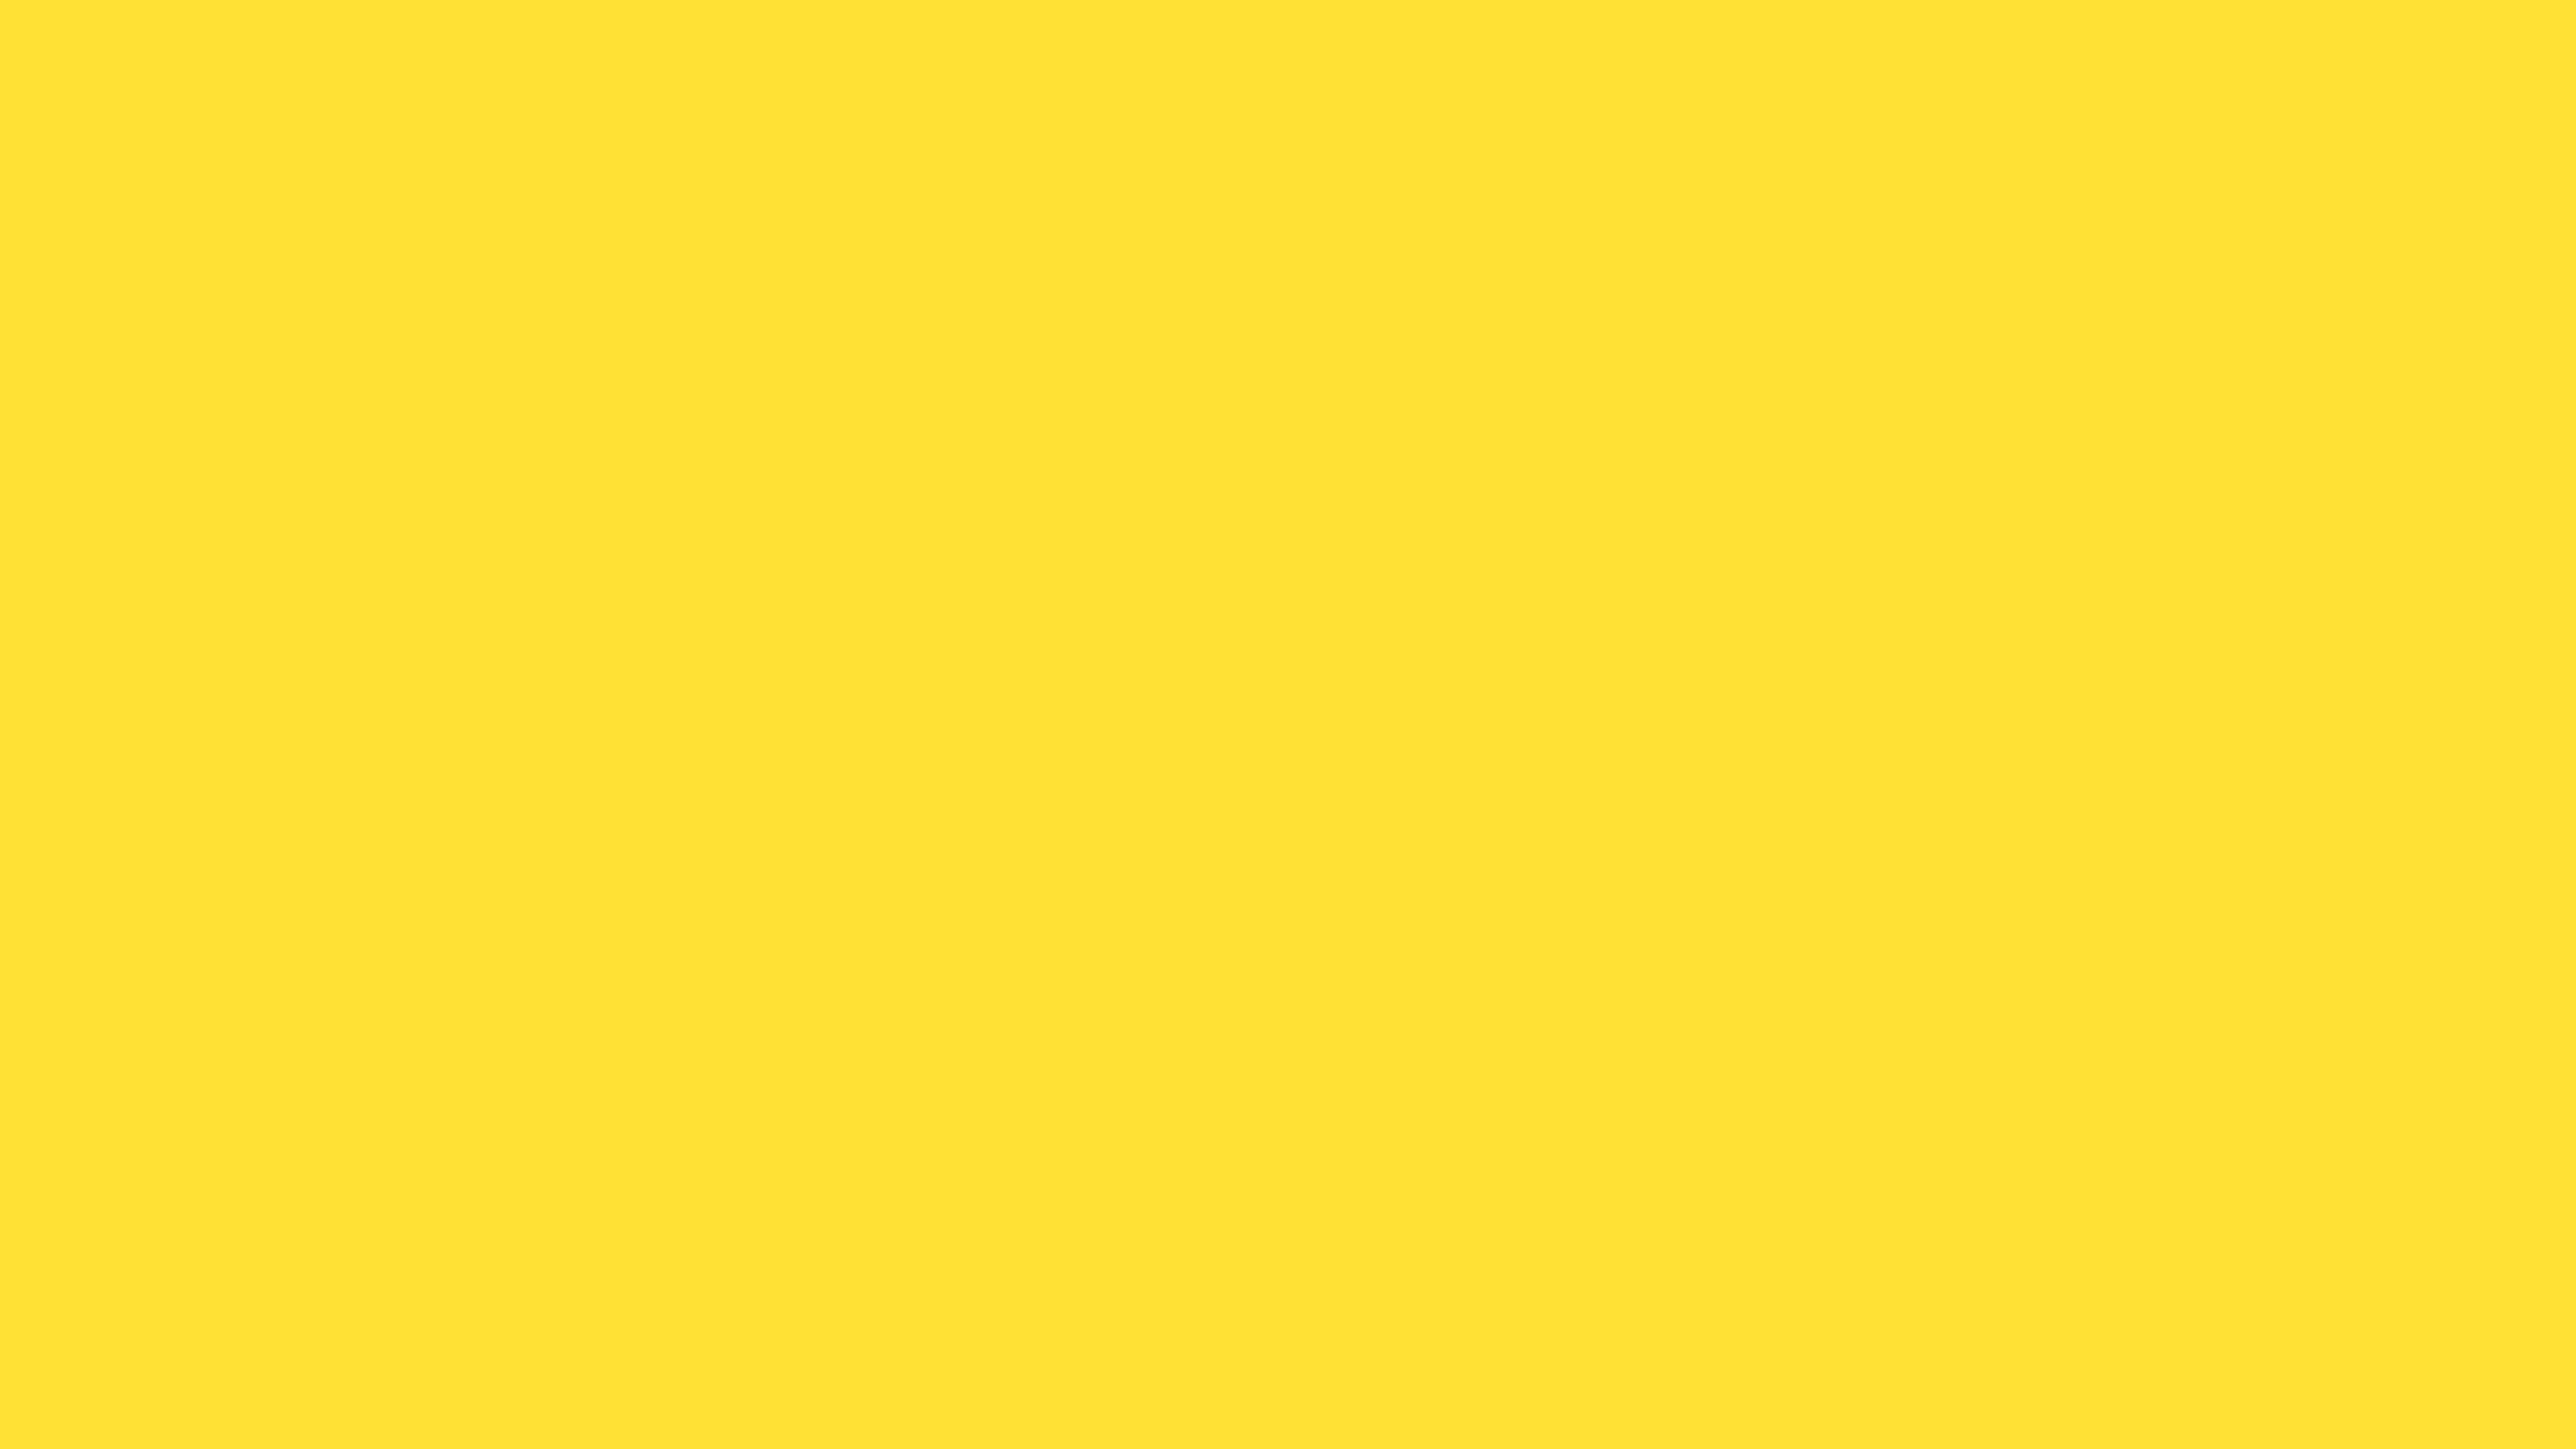 4096x2304 Banana Yellow Solid Color Background